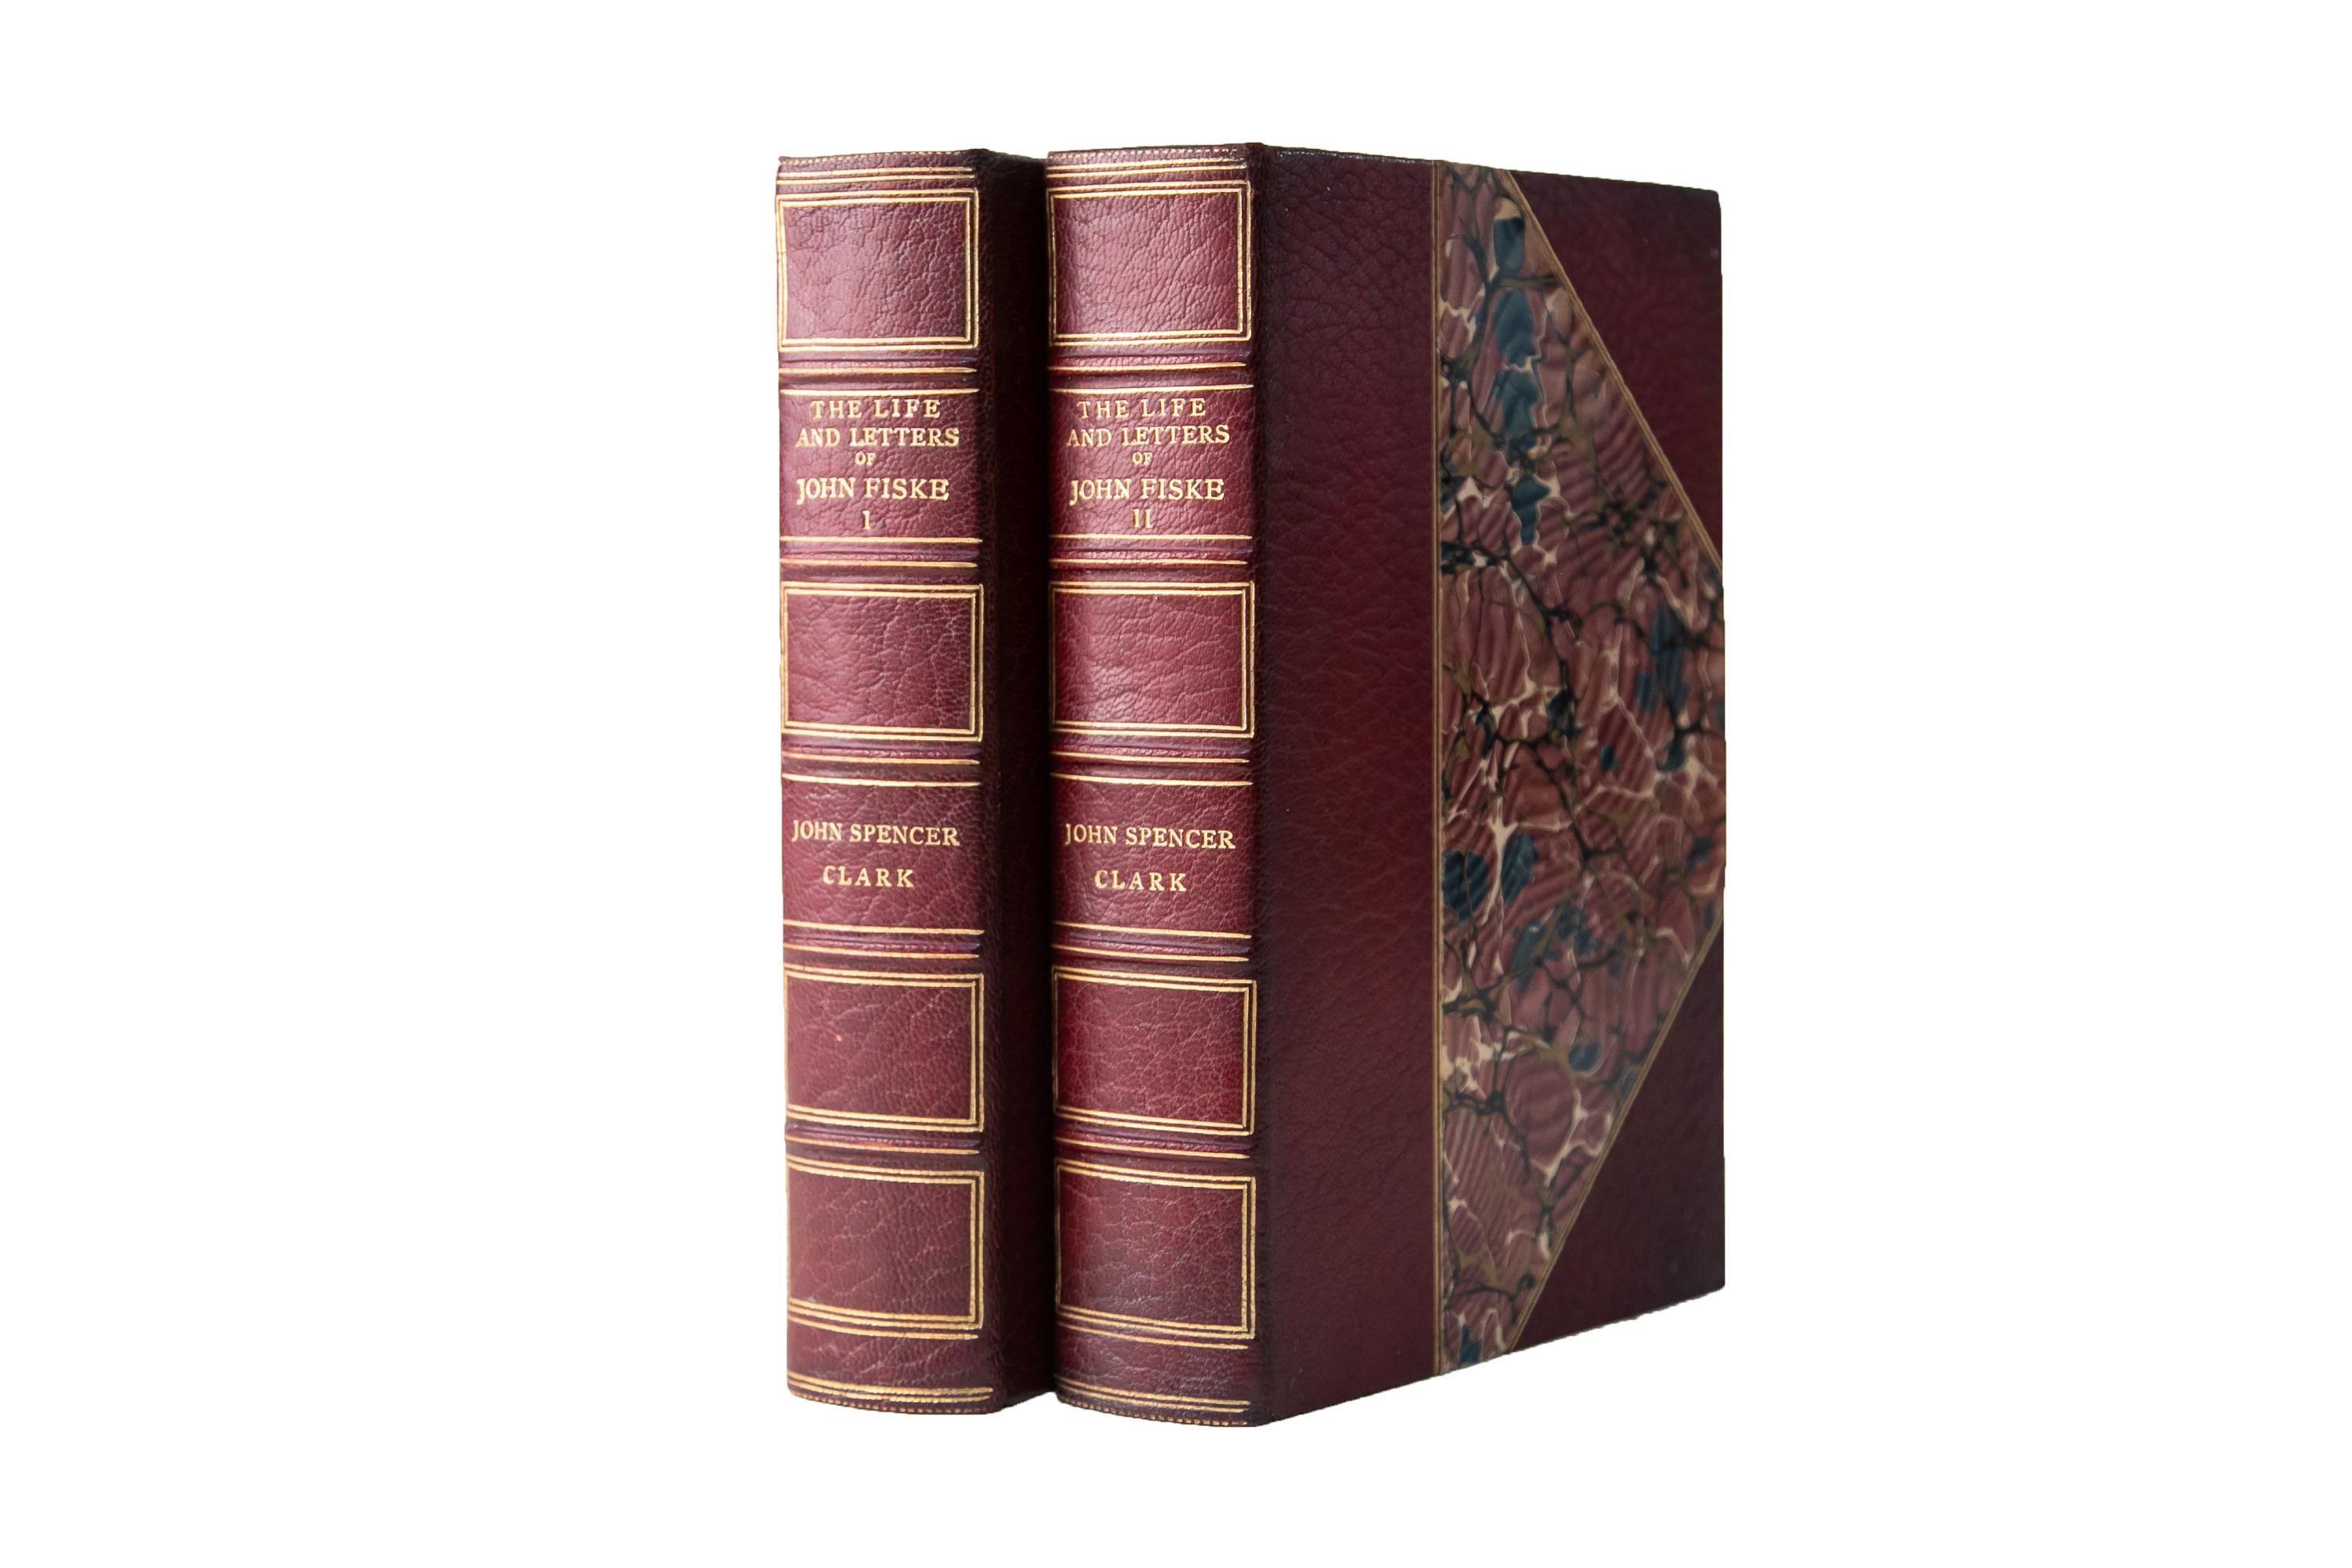 2 Volumes. John Fiske, The Life and Letters. Bound in 3/4 wine morocco and marbled boards, bordered in gilt-tooling. The spines display raised bands, bordering, and label lettering, all gilt-tooled. The top edges are gilded with marbled endpapers.